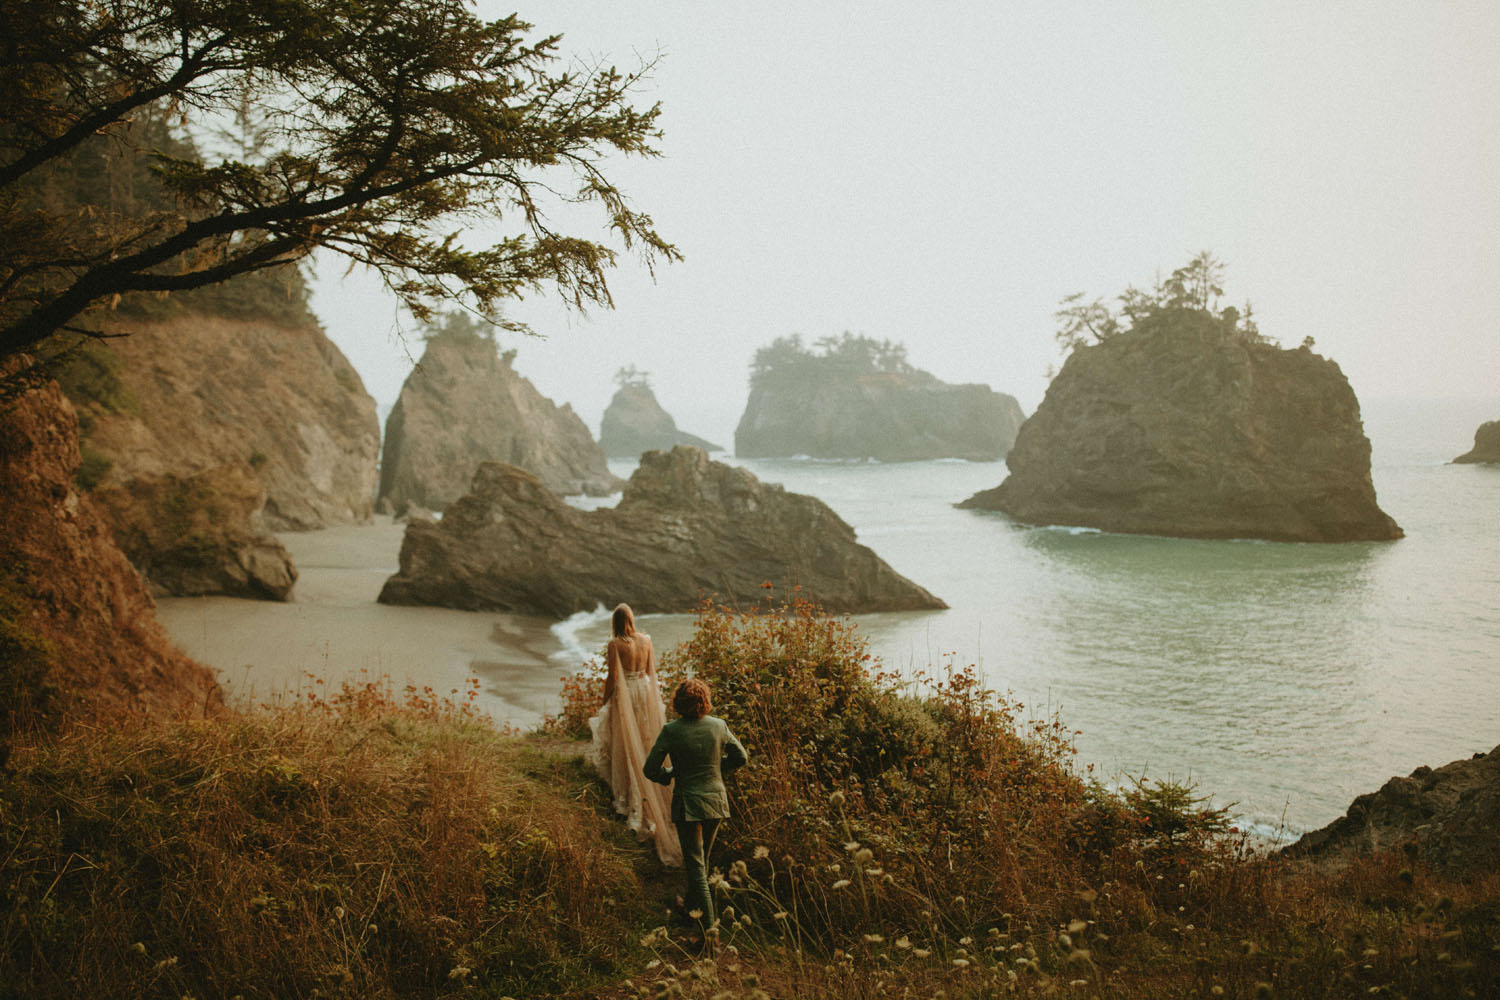 Oregon and California in a Day Elopement